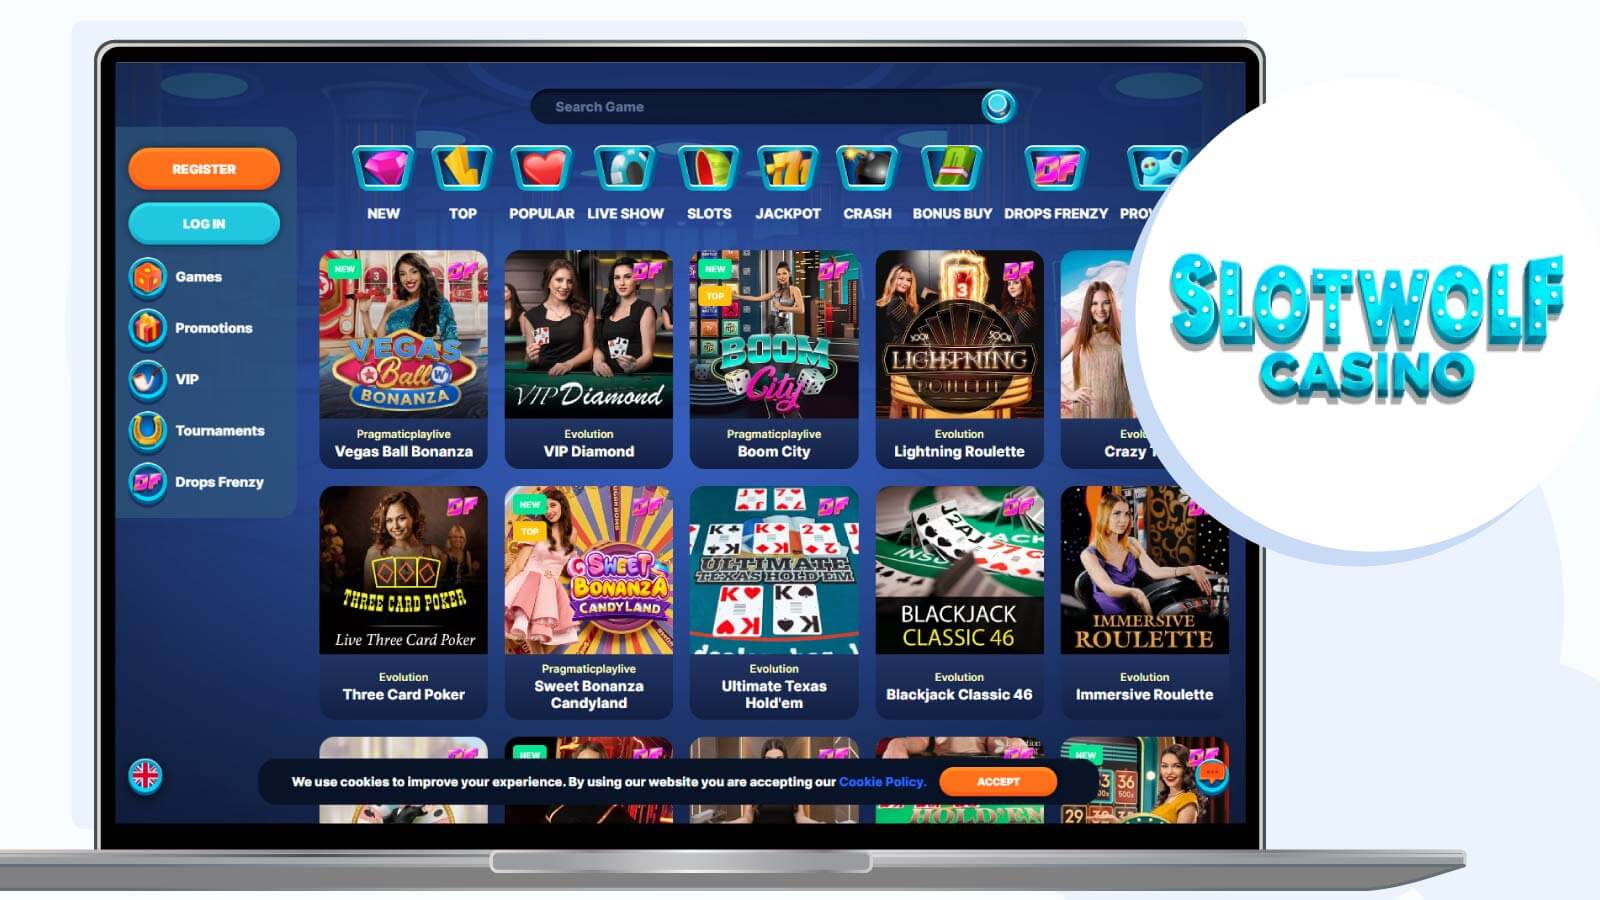 Slot Wolf Casino – Play Roulette Table Game with a Welcome Bonus